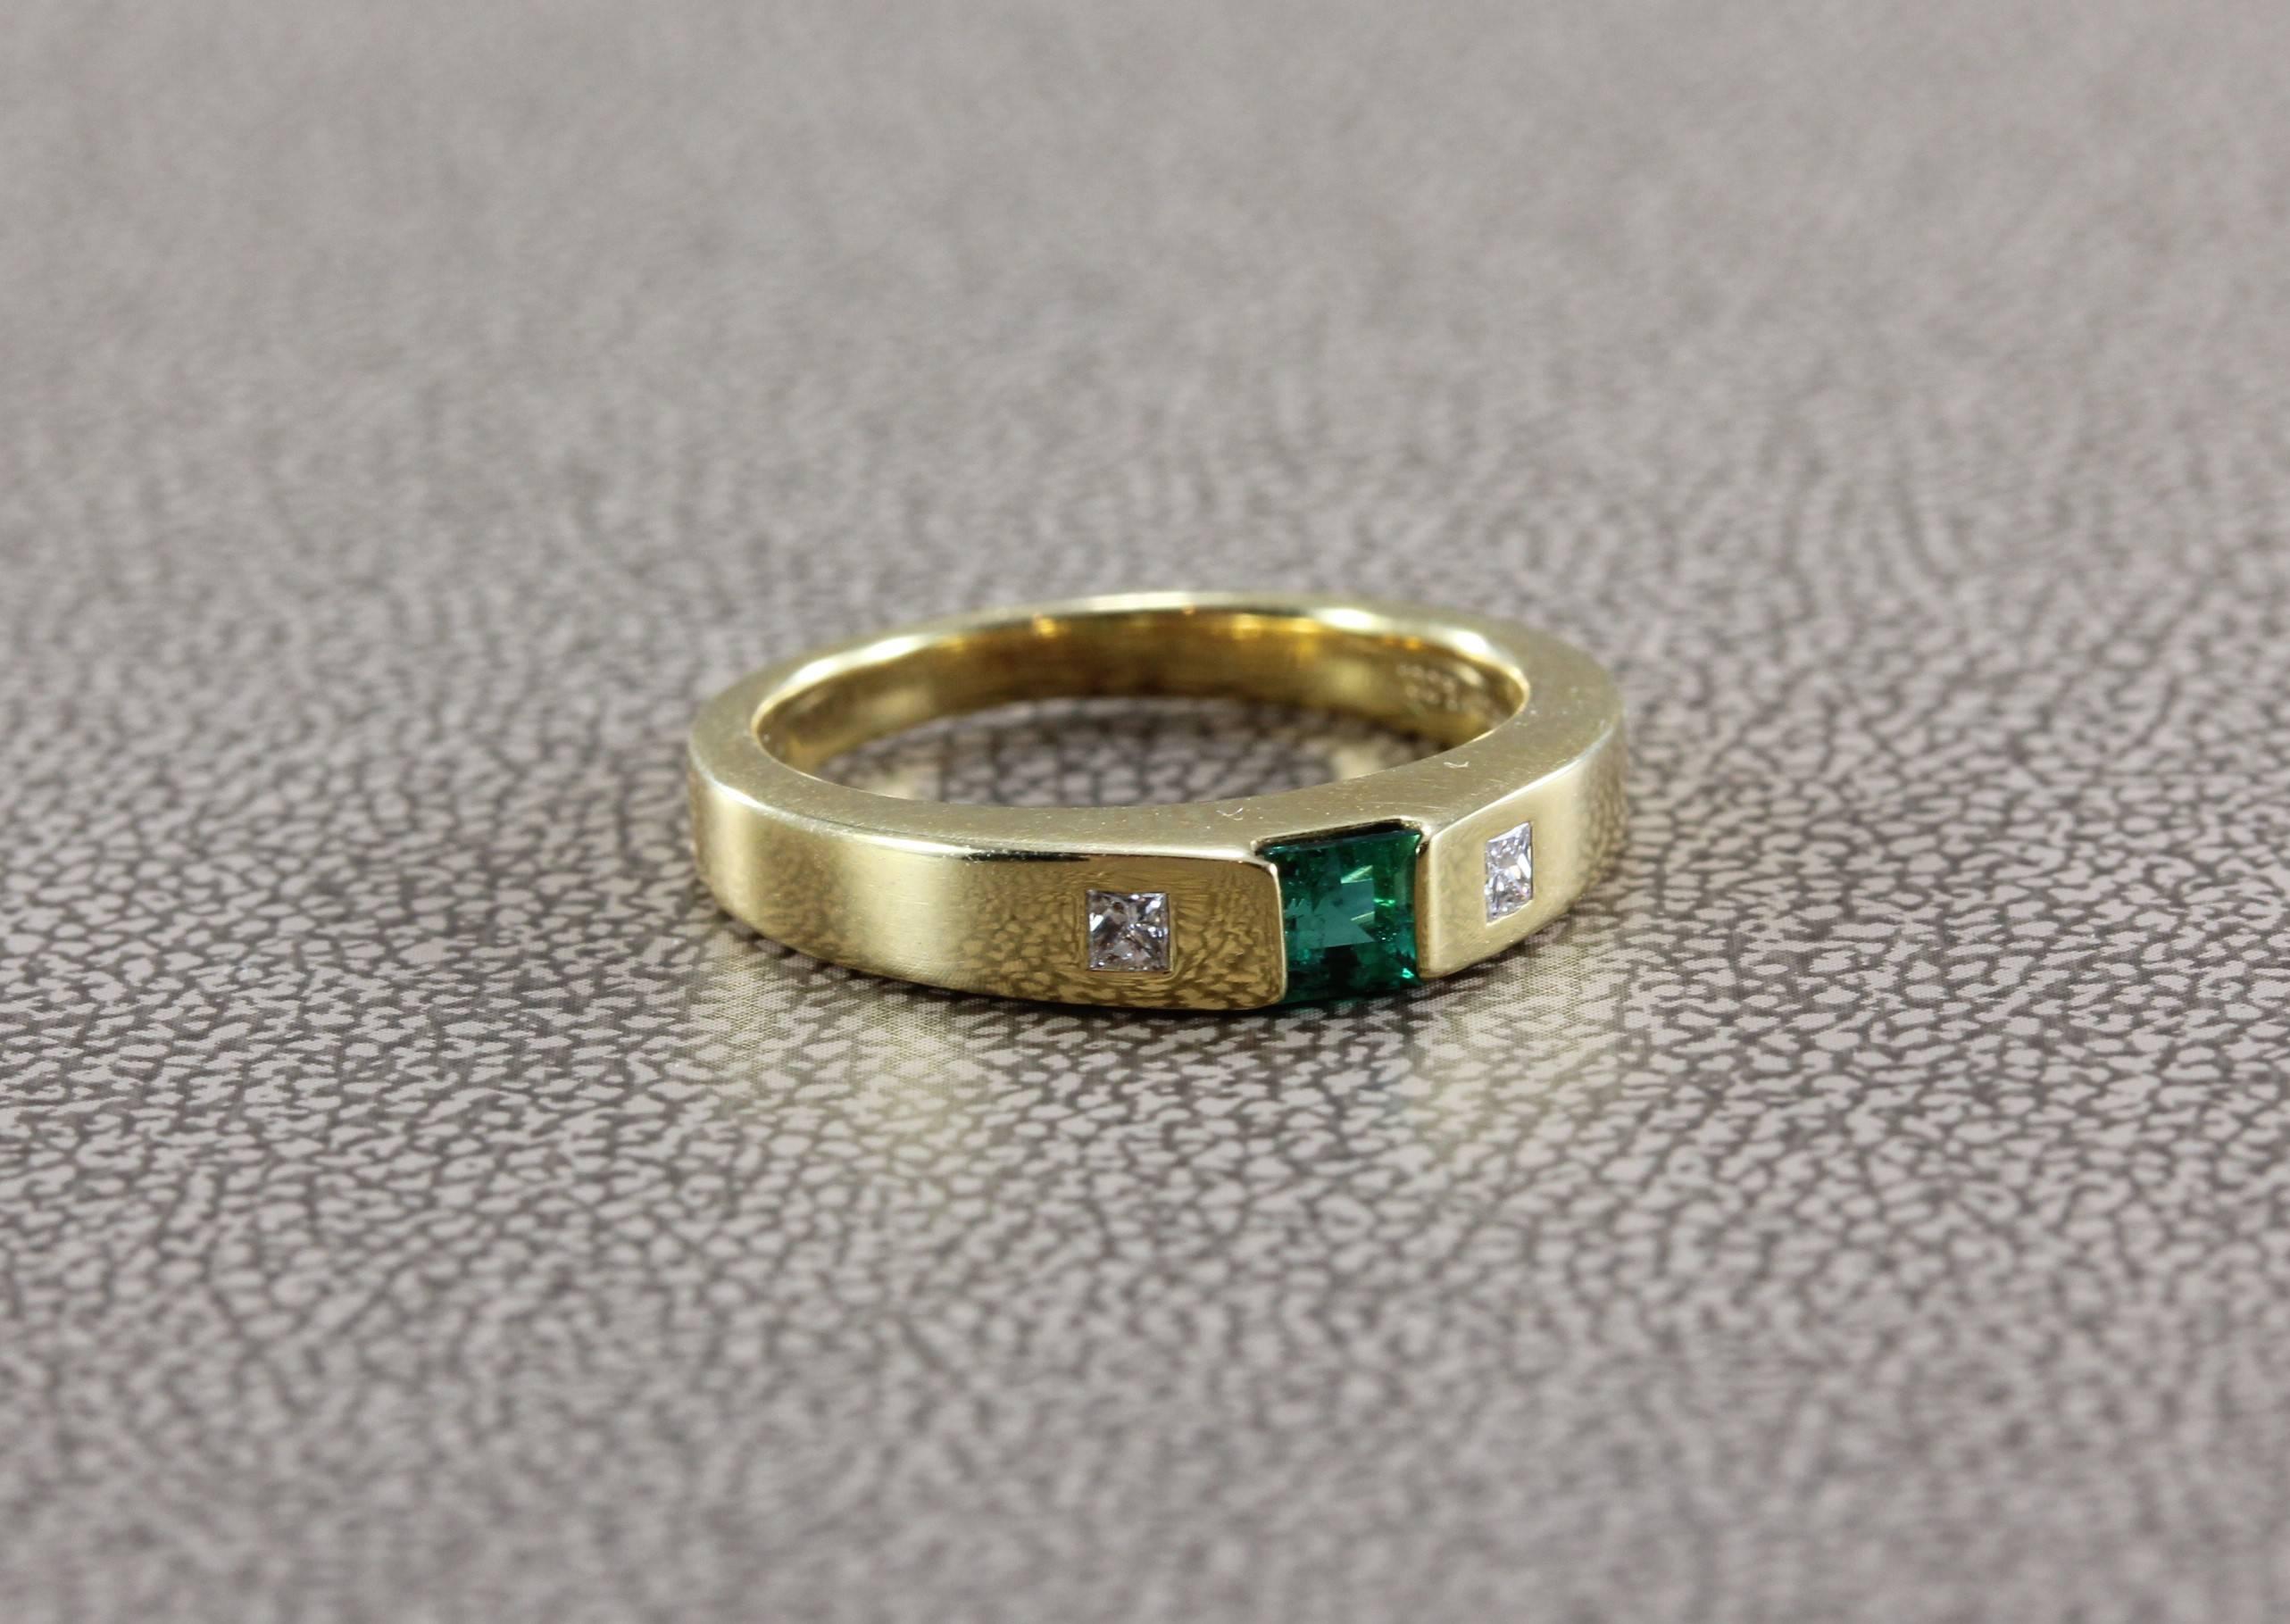 A Tiffany & Co. original, this band ring mains a vivid green emerald with two princess cut diamonds bezel set in 18K yellow gold. A quality made piece of jewelry by the famed Tiffany house, great for everyday wear and as a gift. 

Ring Size 5
